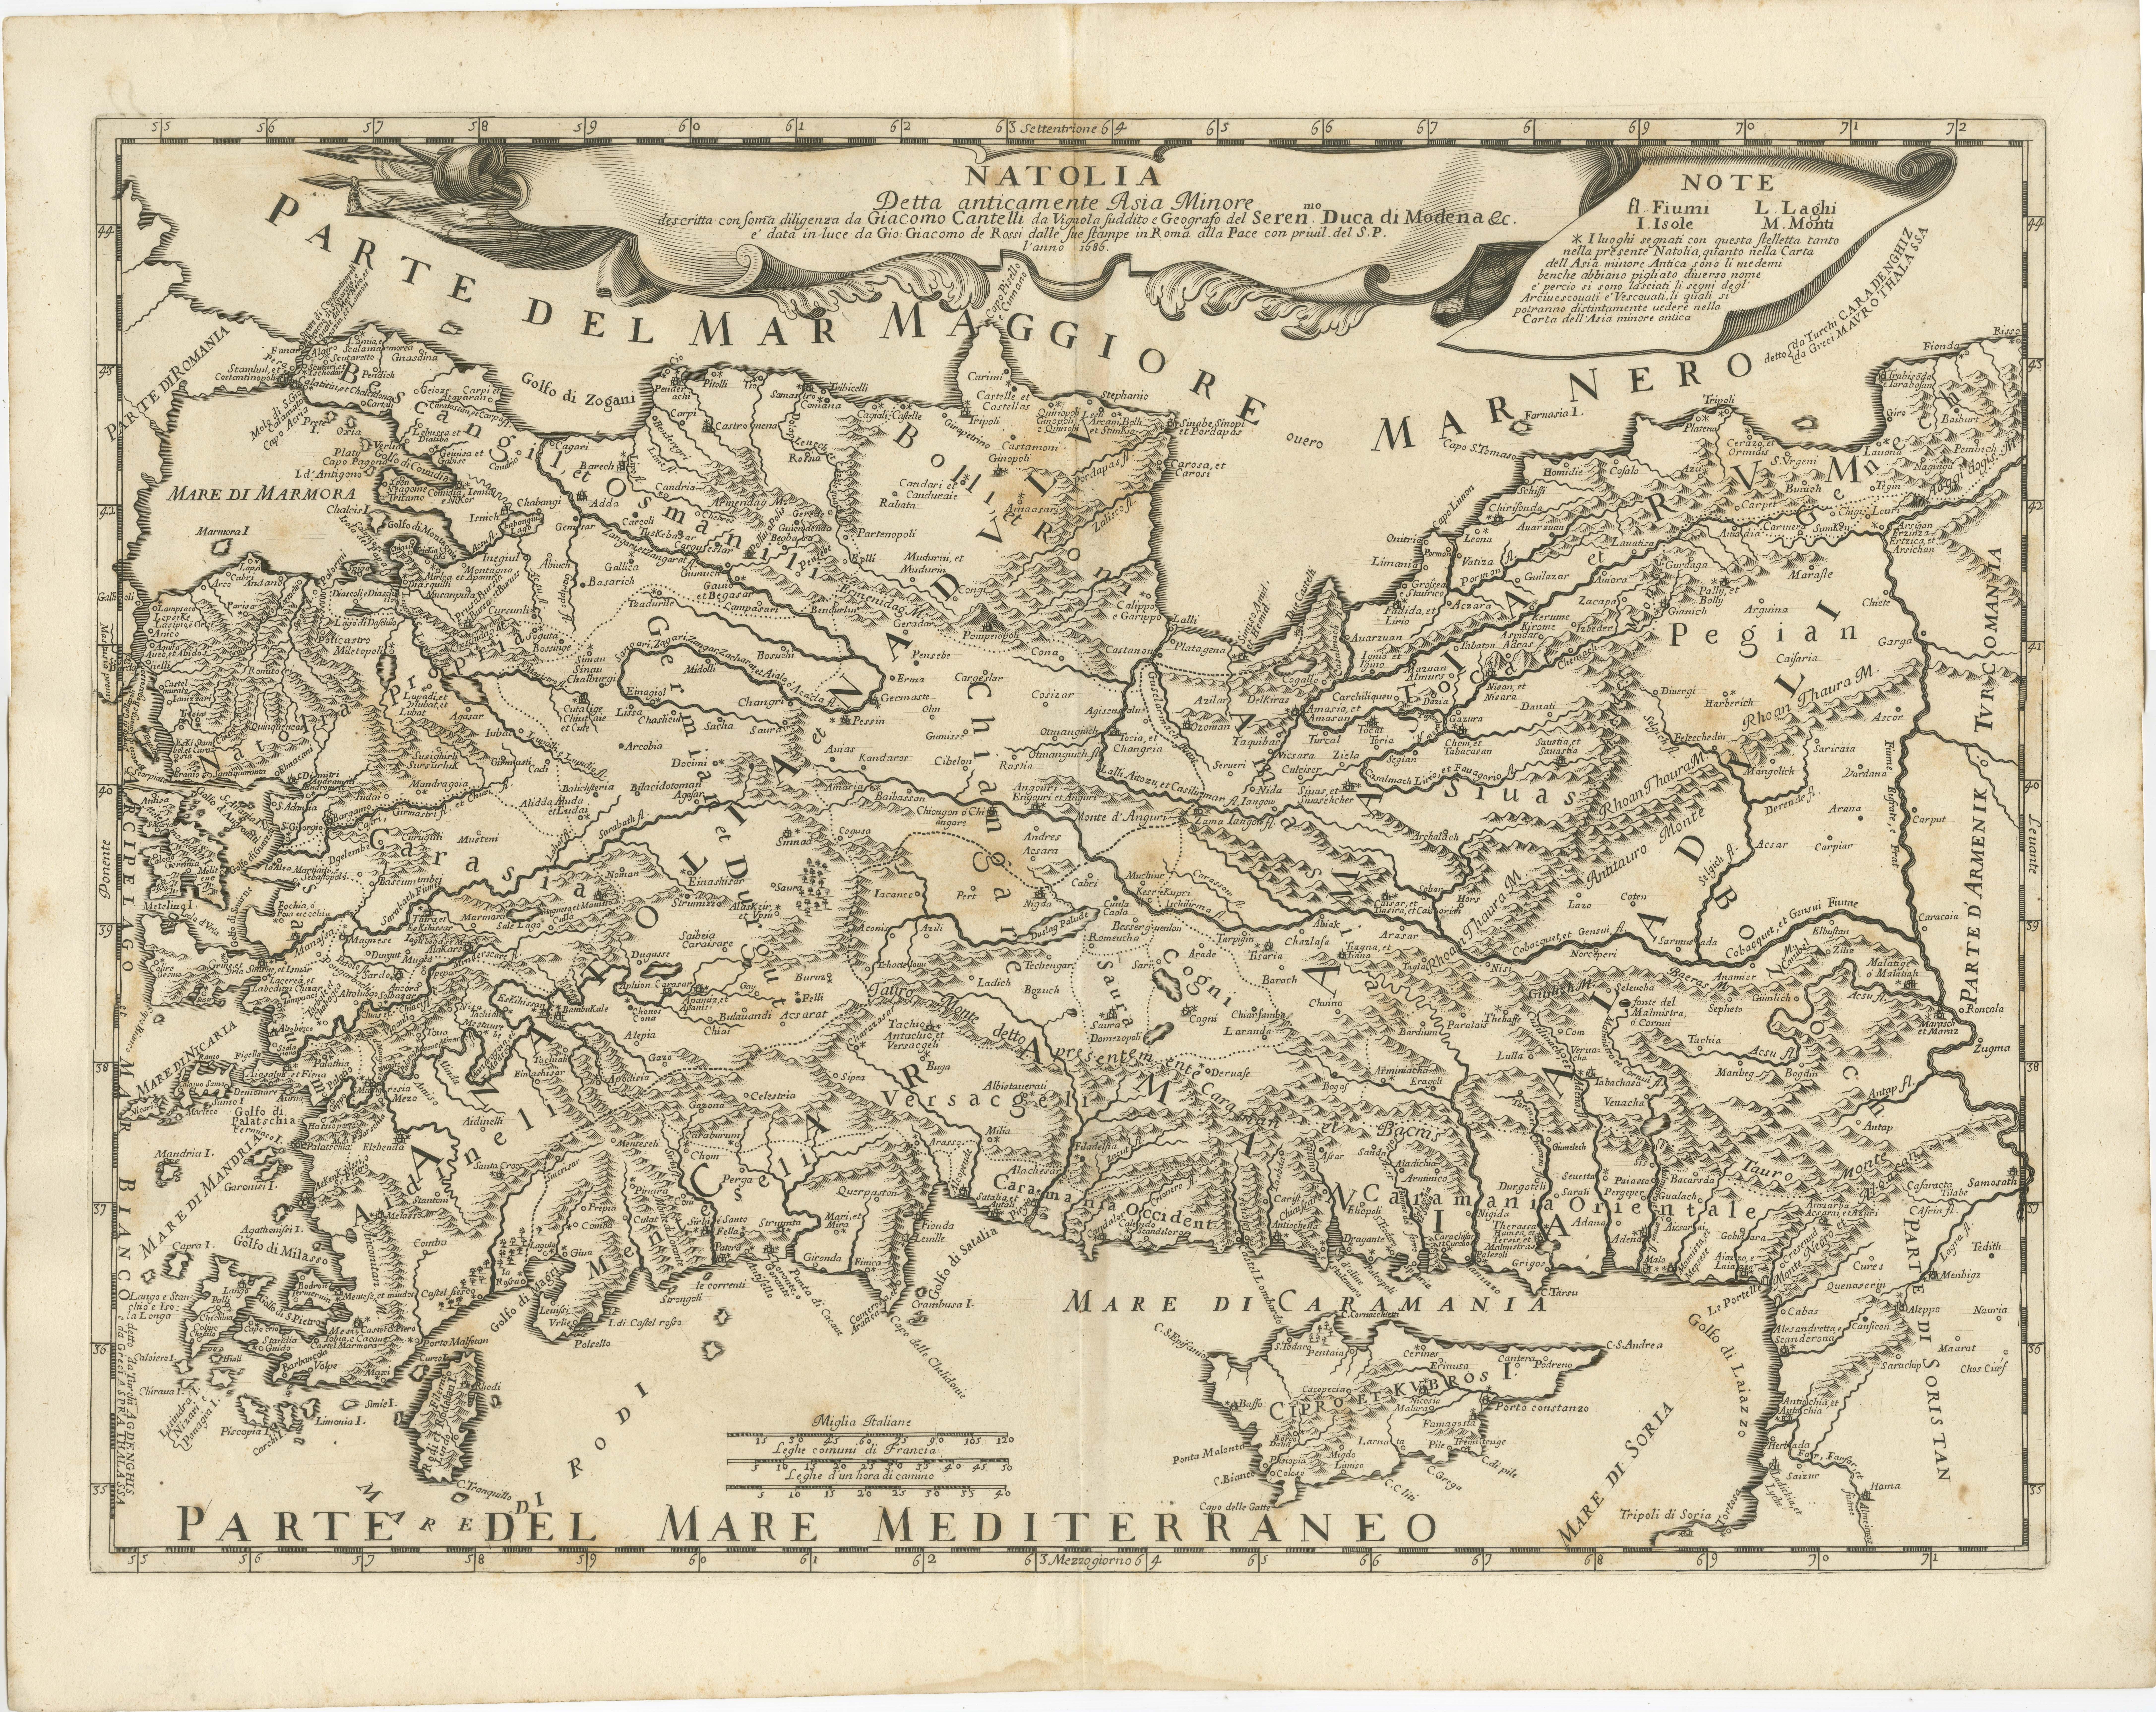 Antique map titled 'Natolia detta anticamente Asia Minor (..)'. Rare map of Asia Minor (Turkey) and Cyprus and neighboring regions. The map provides one of the most detailed and up to date treatments of the region. Includes several ornate cartouches